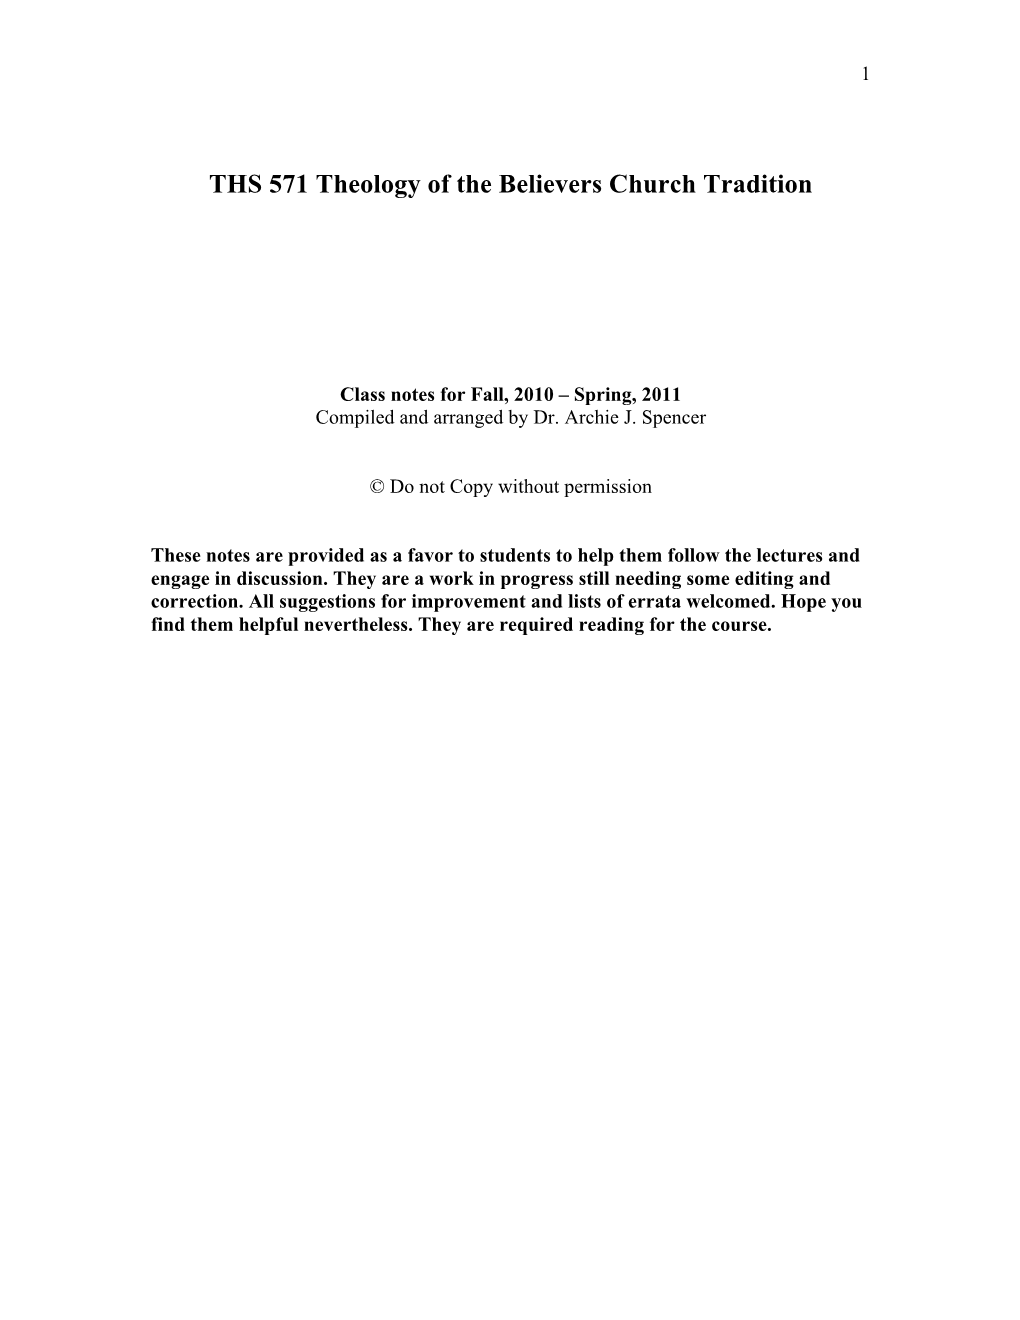 THS 571 Theology of the Believers Church Tradition